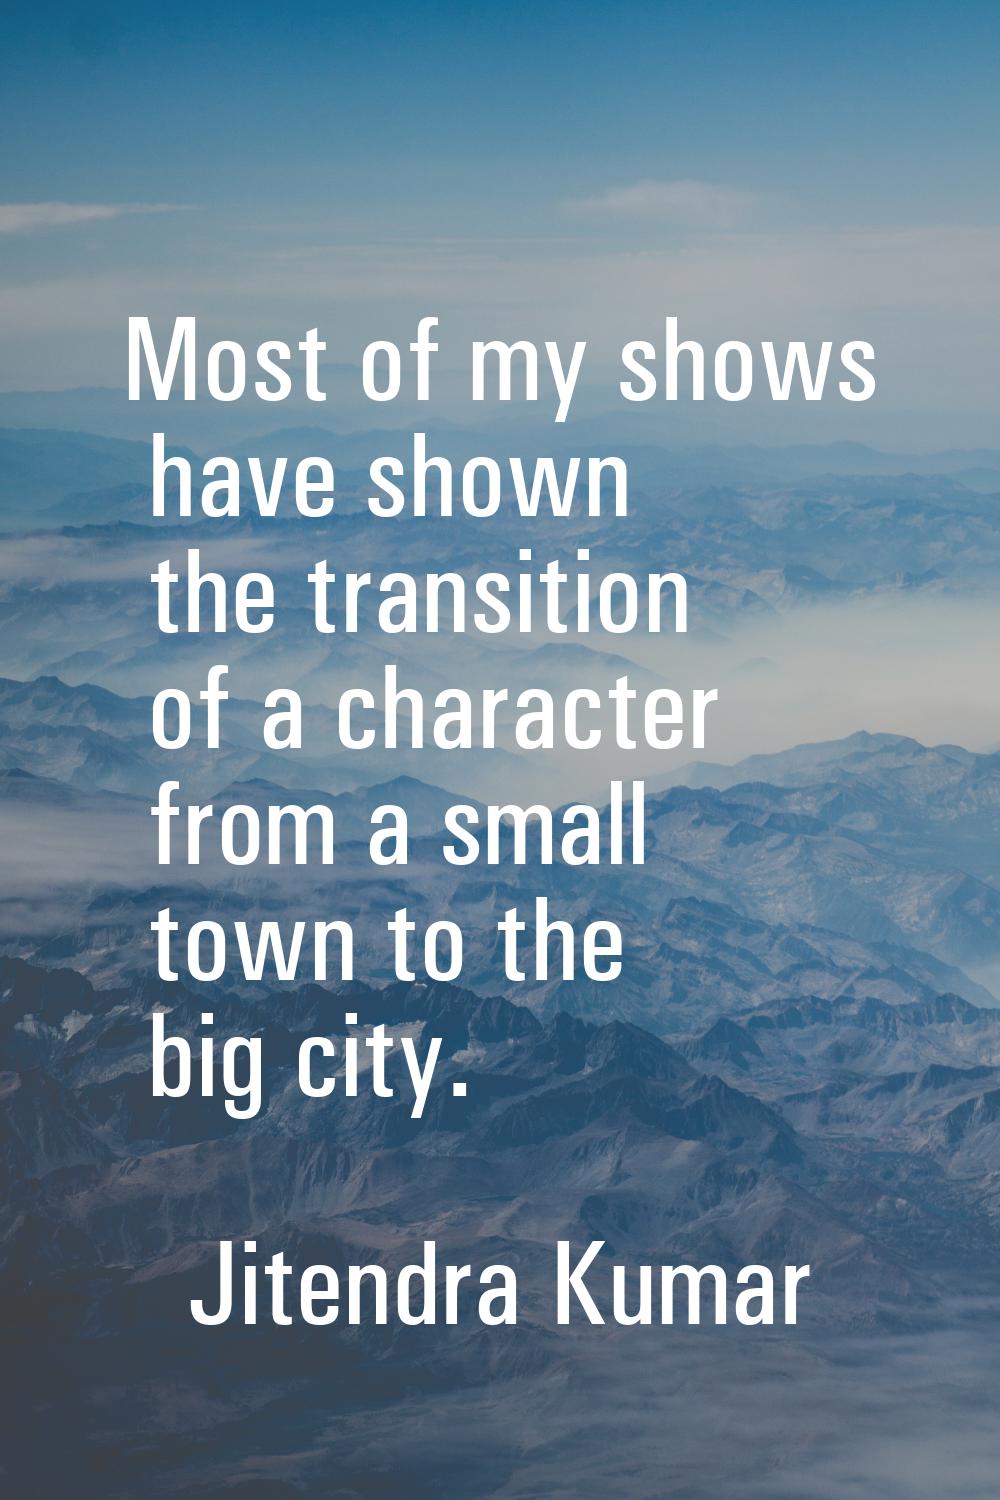 Most of my shows have shown the transition of a character from a small town to the big city.